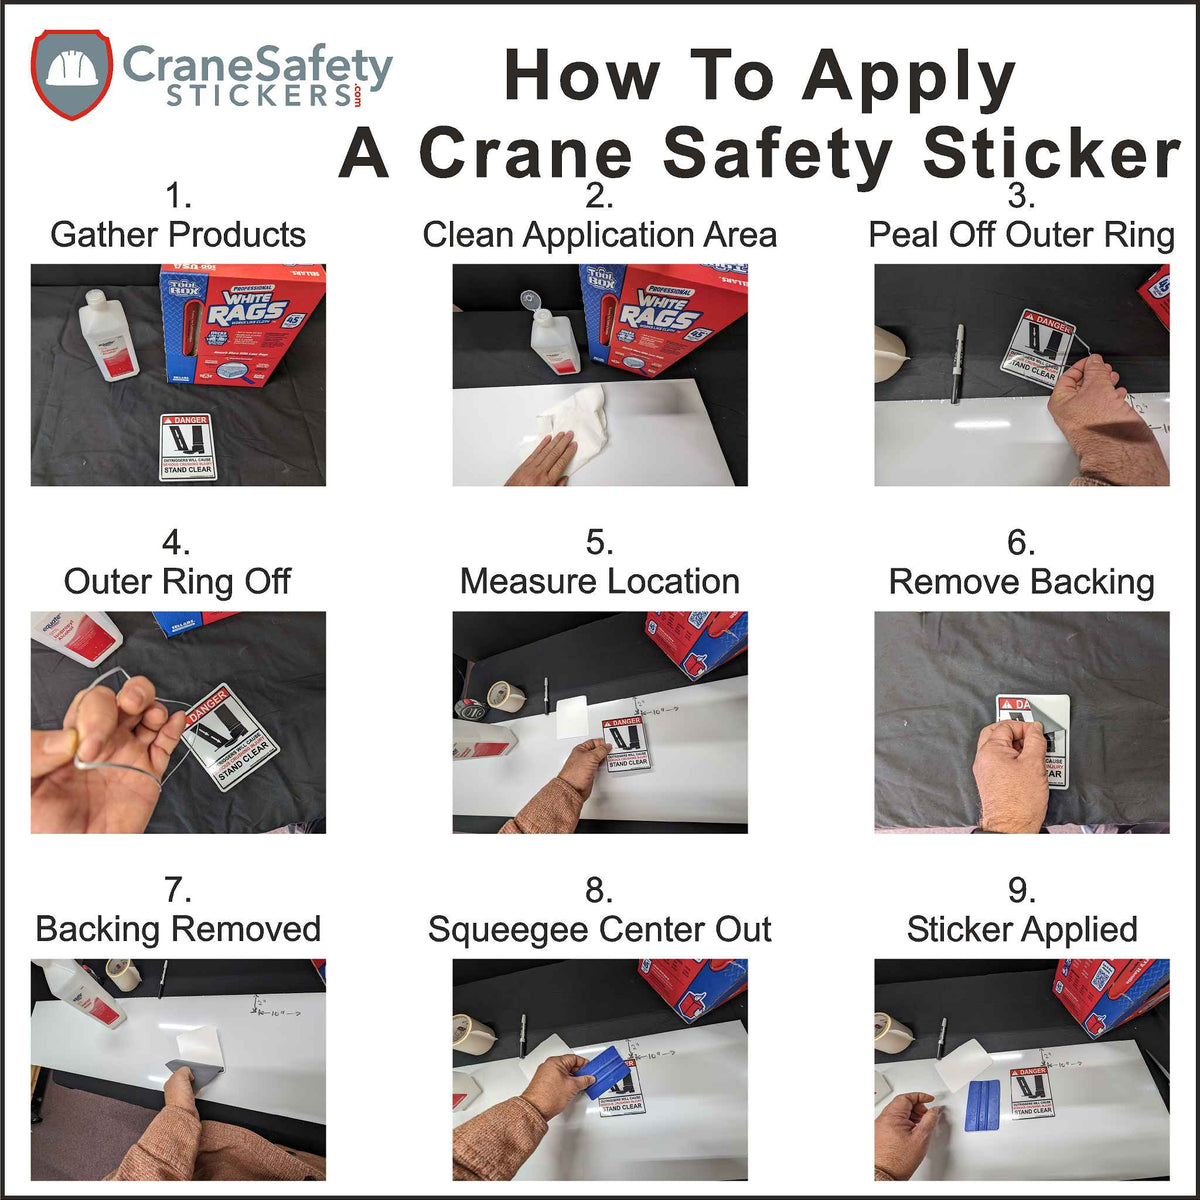 How To Apply Our Backhoe Stickers, Backhoe Safety Stickers Kit.